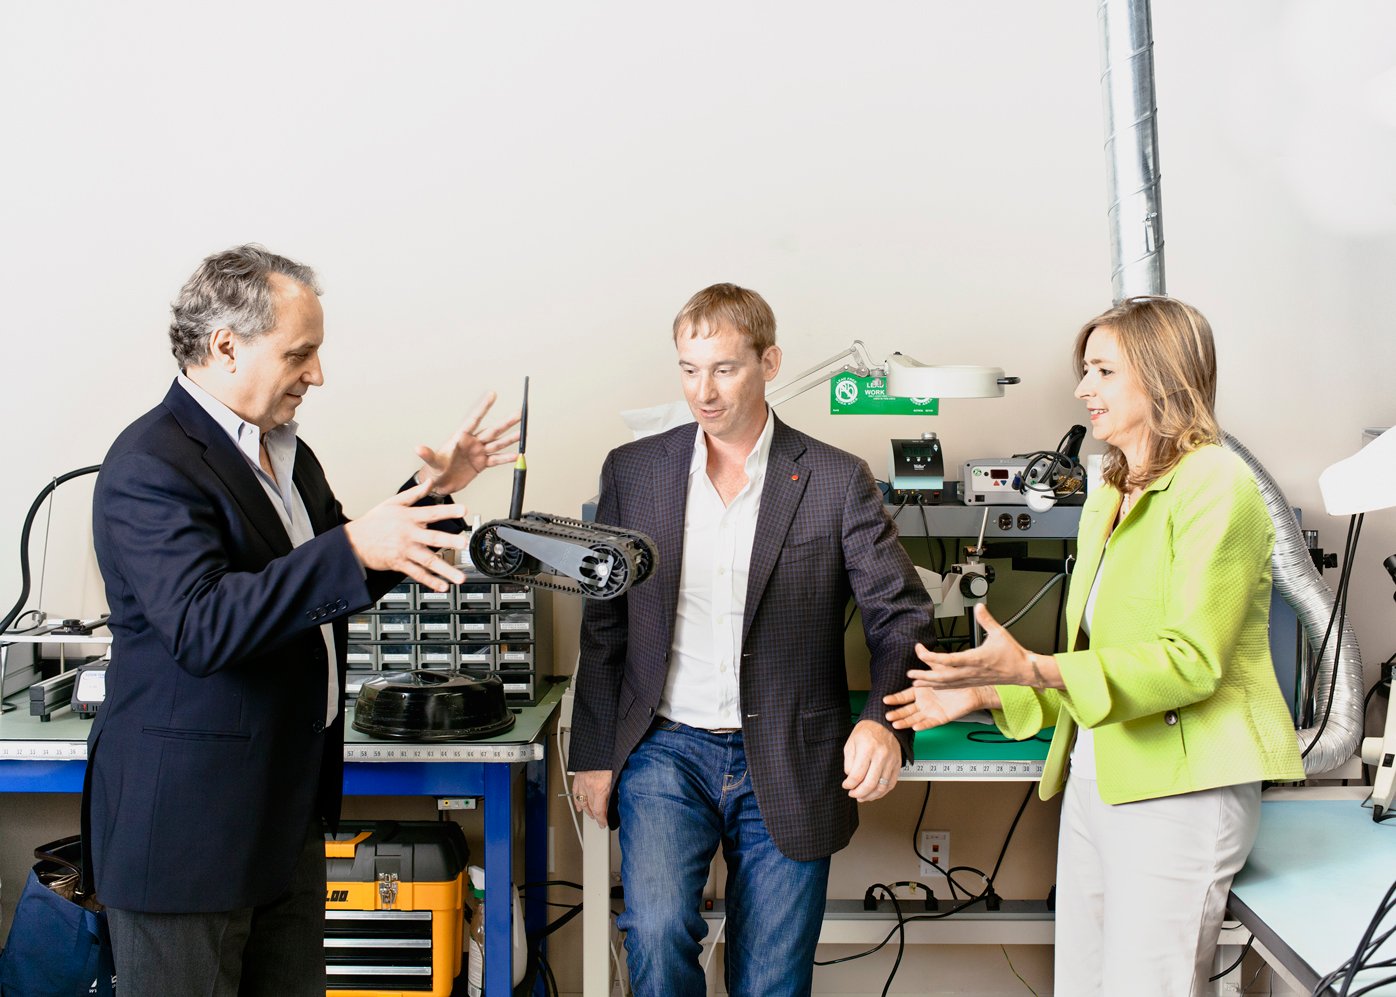 helen greiner on far right discussing a robot with two male colleagues on the left